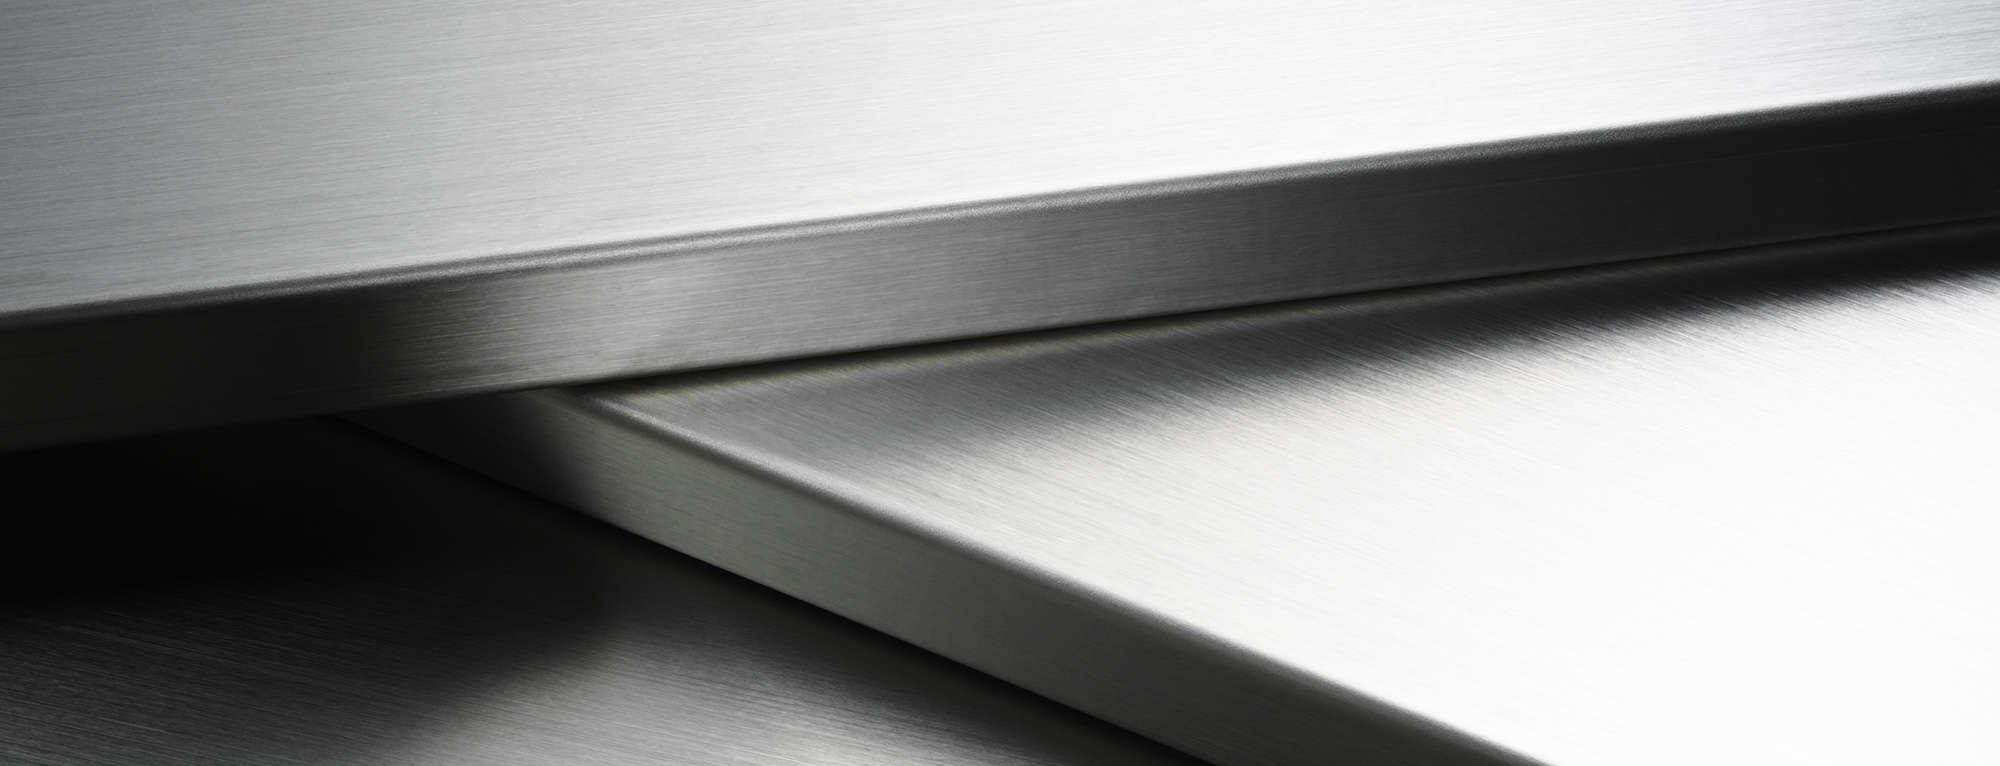 Product Stainless Steel Plate Sizes | 316, 304 | Metal Supplies™ image